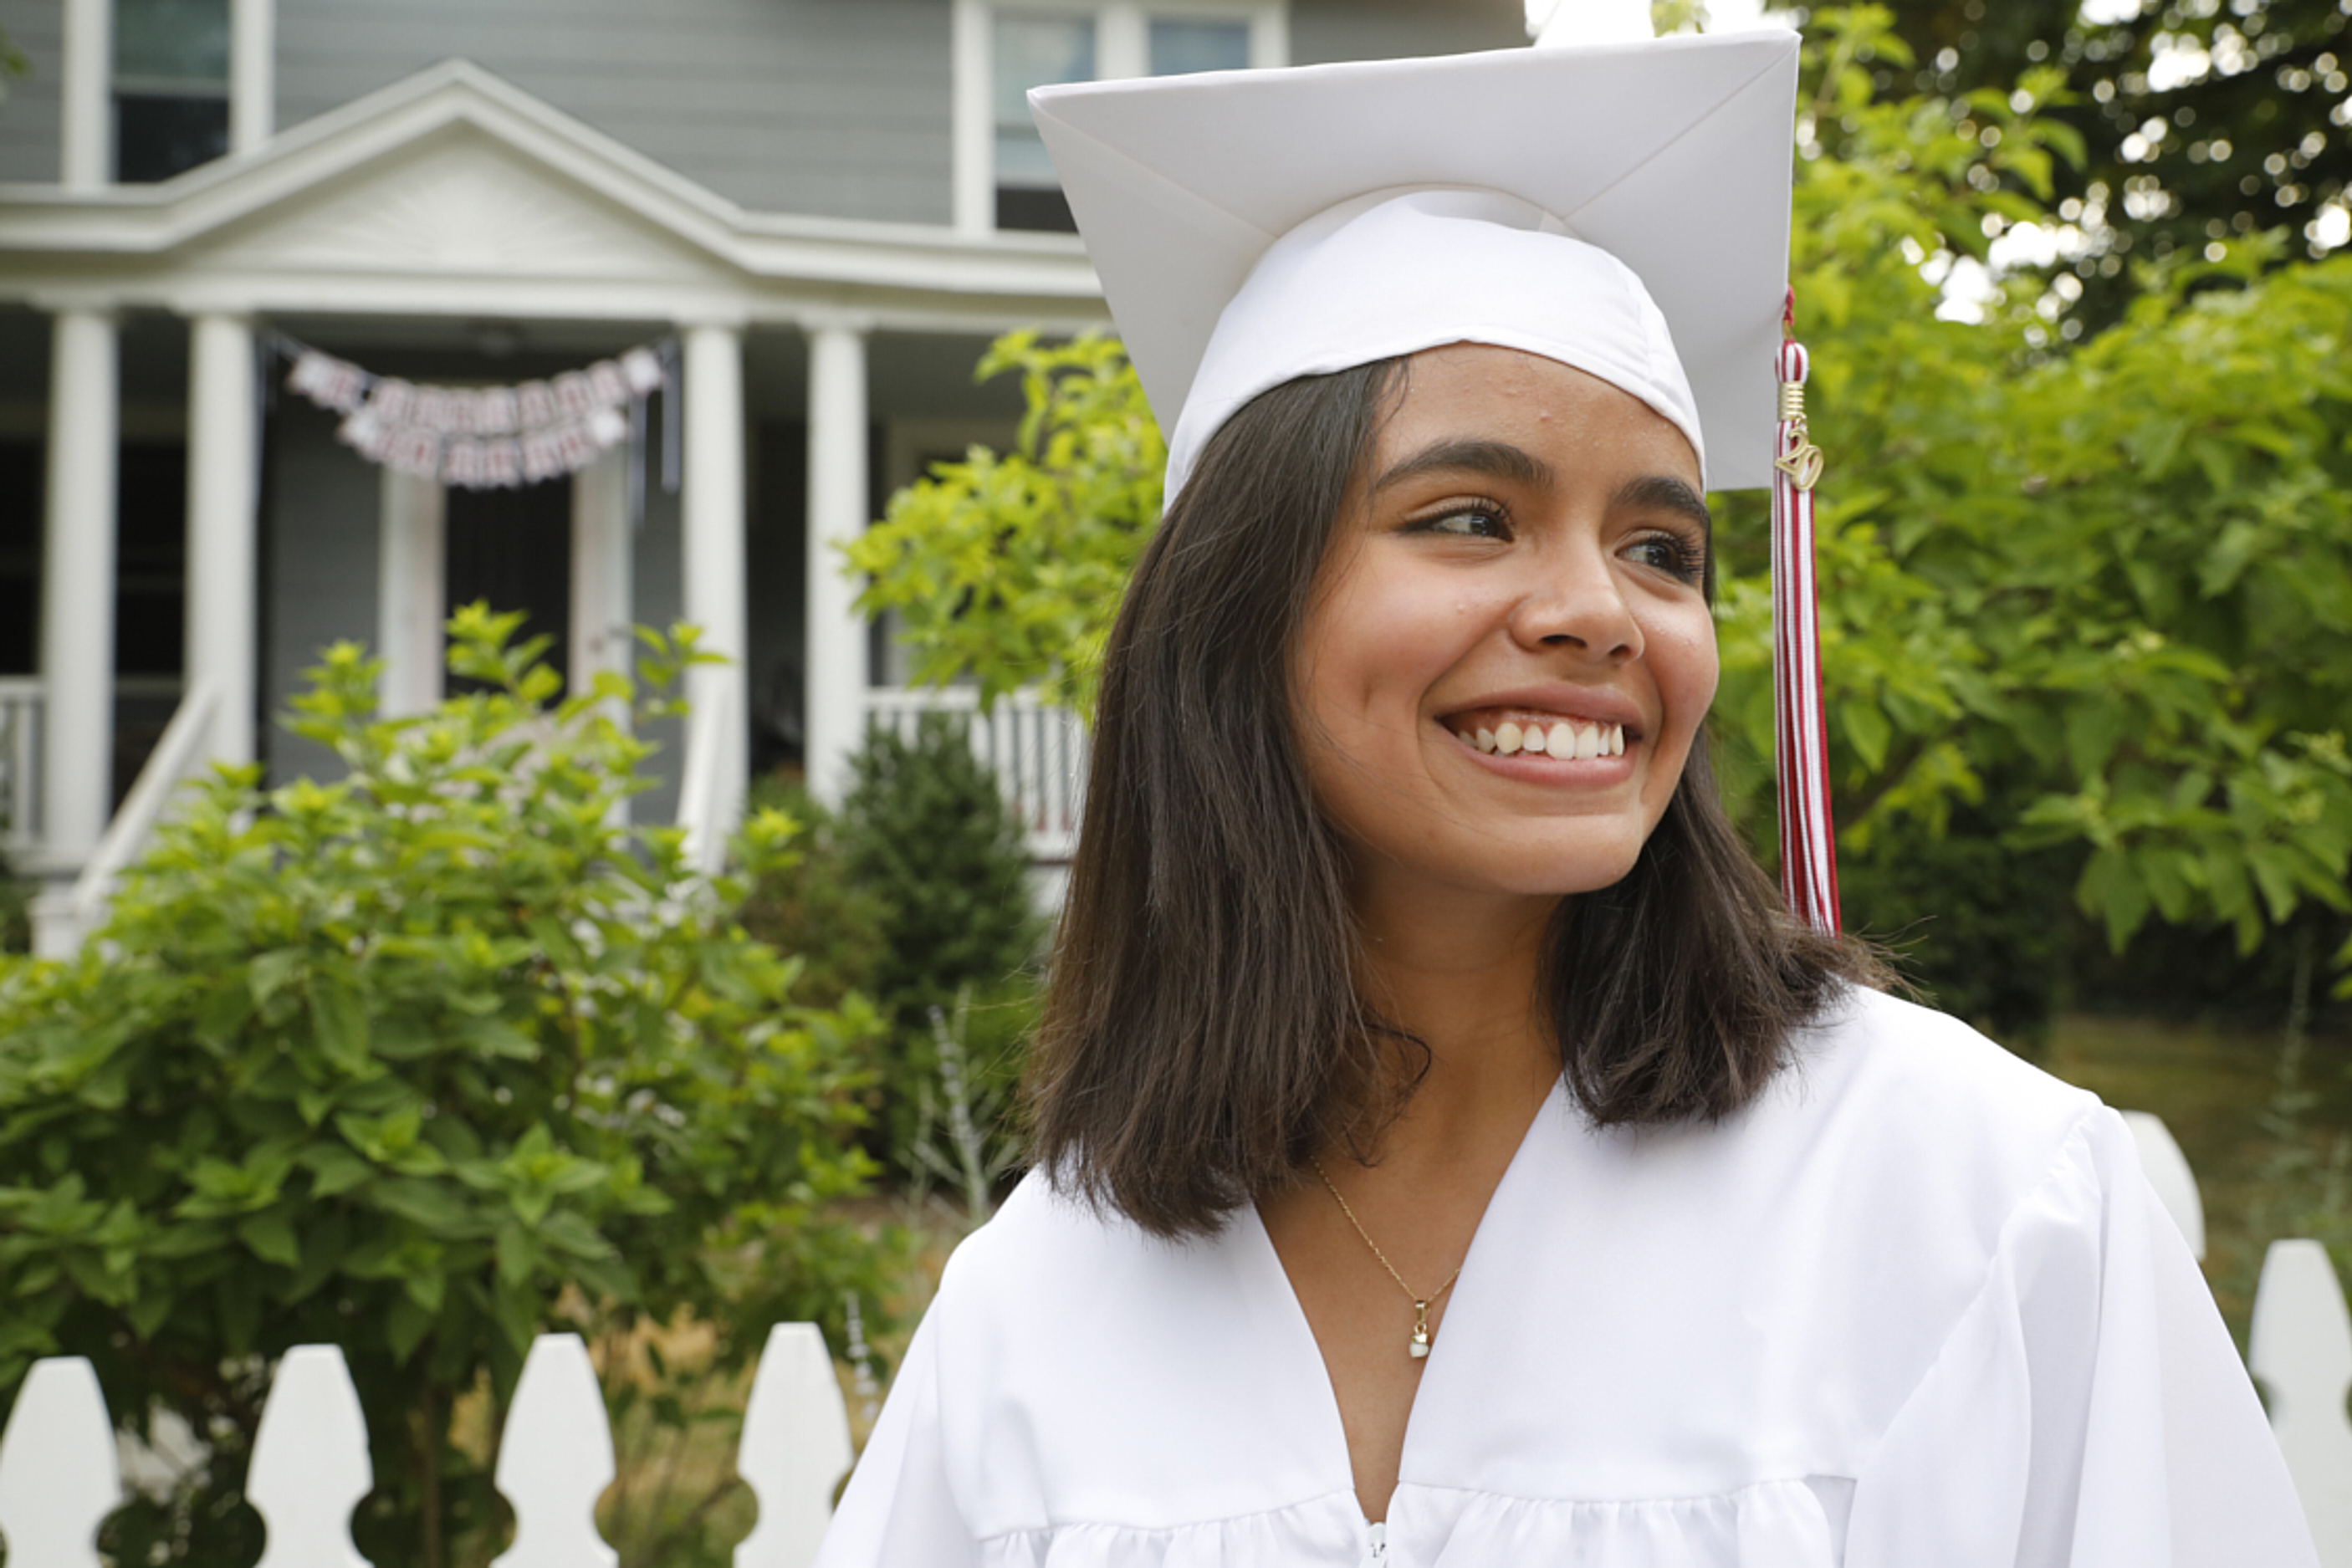 Graduate in white cap and gown smiling outdoors with a house in the background